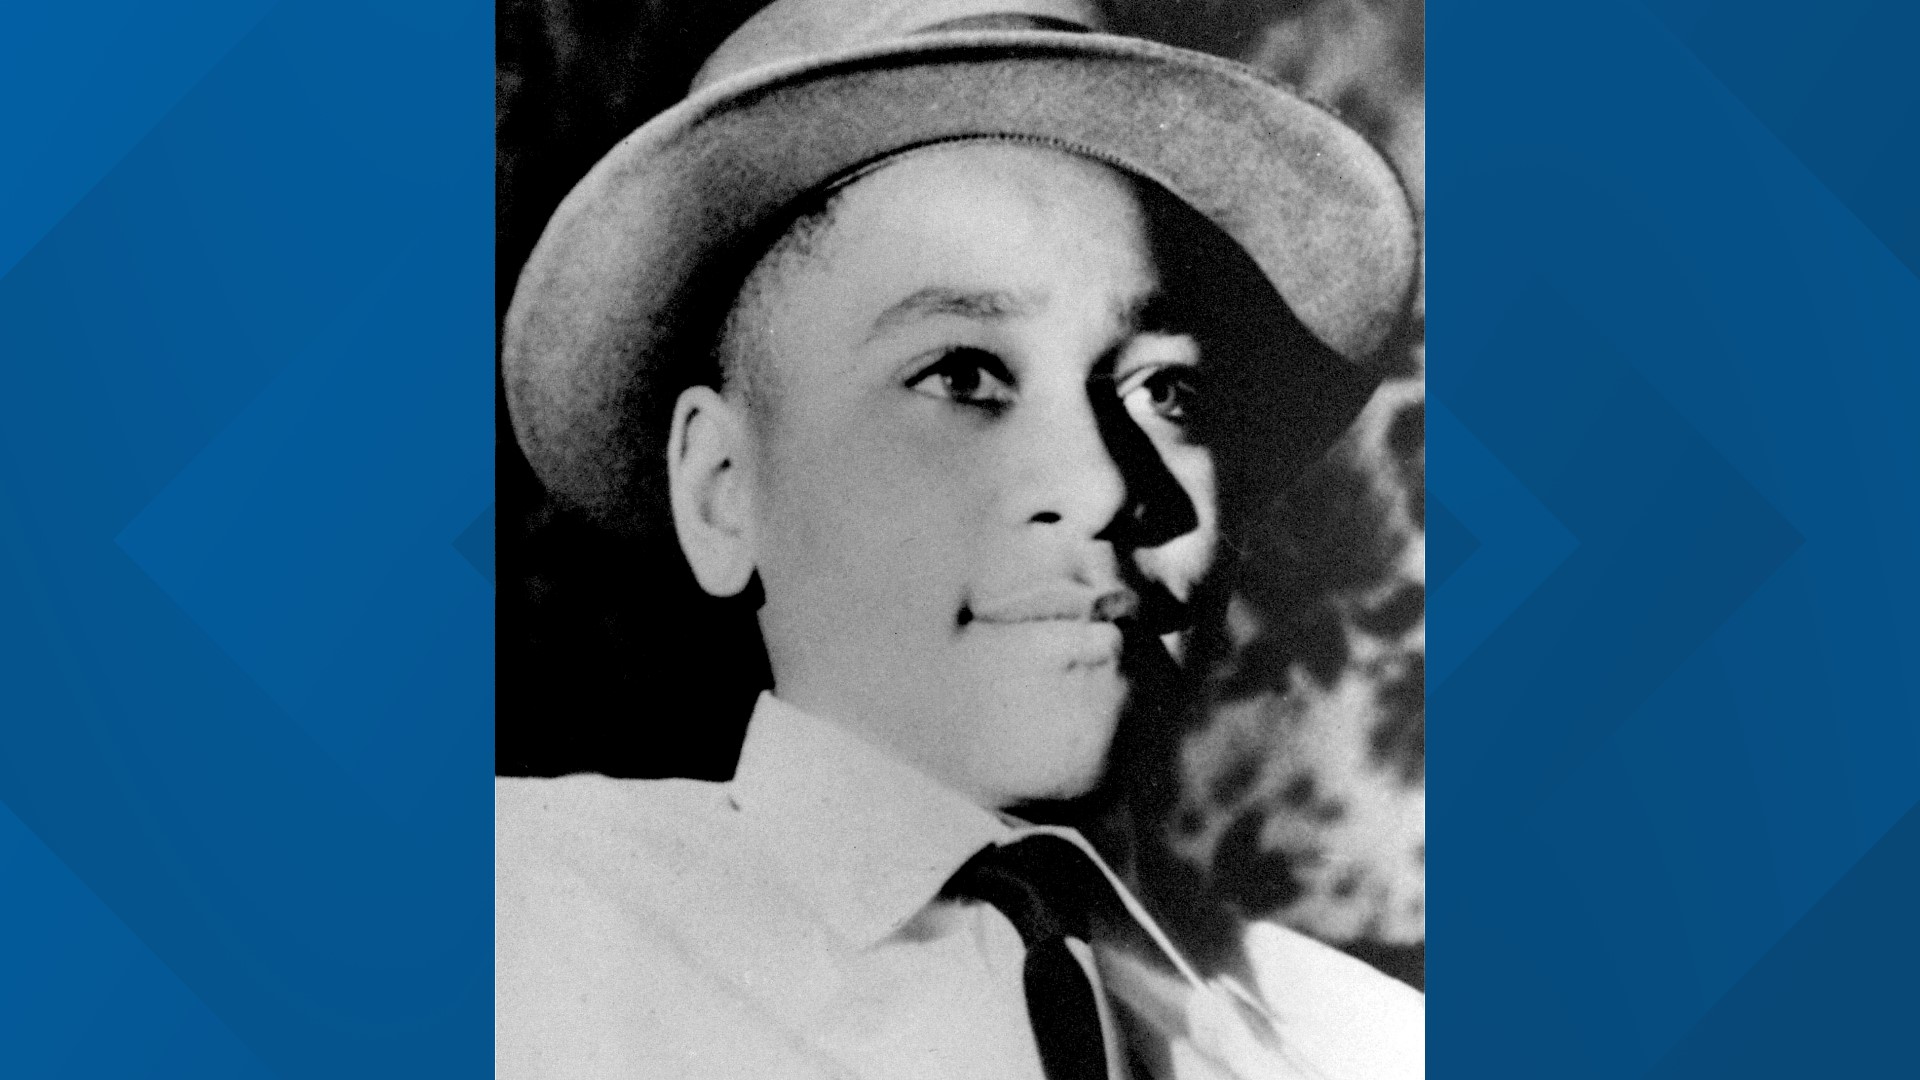 The Emmett Till and Mamie Till-Mobley National Monument will be located across three sites in Illinois and Mississippi and will be federally protected places.